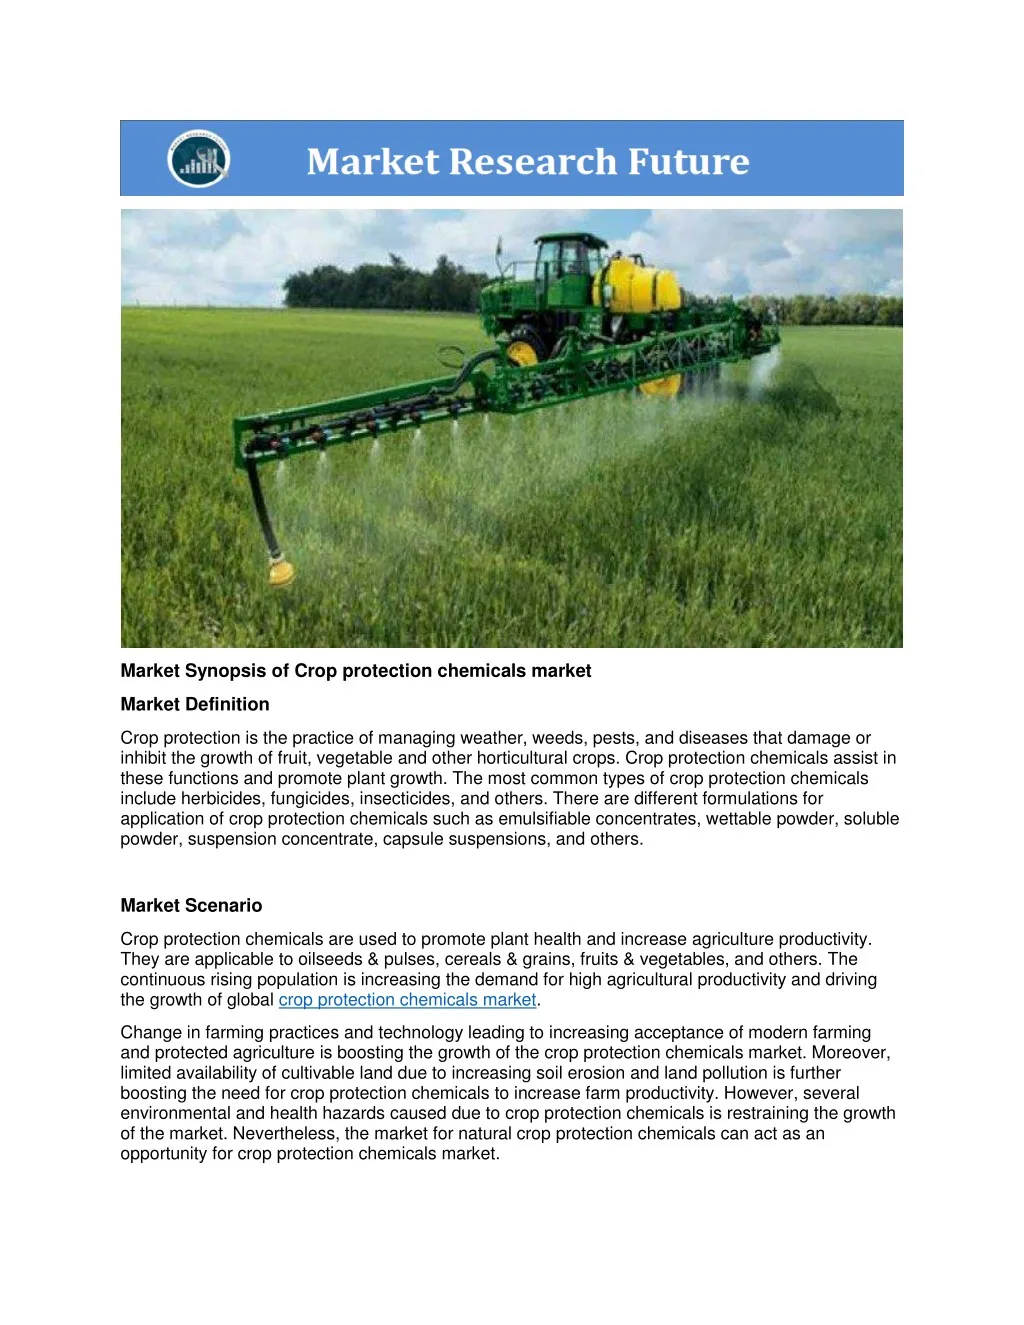 market synopsis of crop protection chemicals